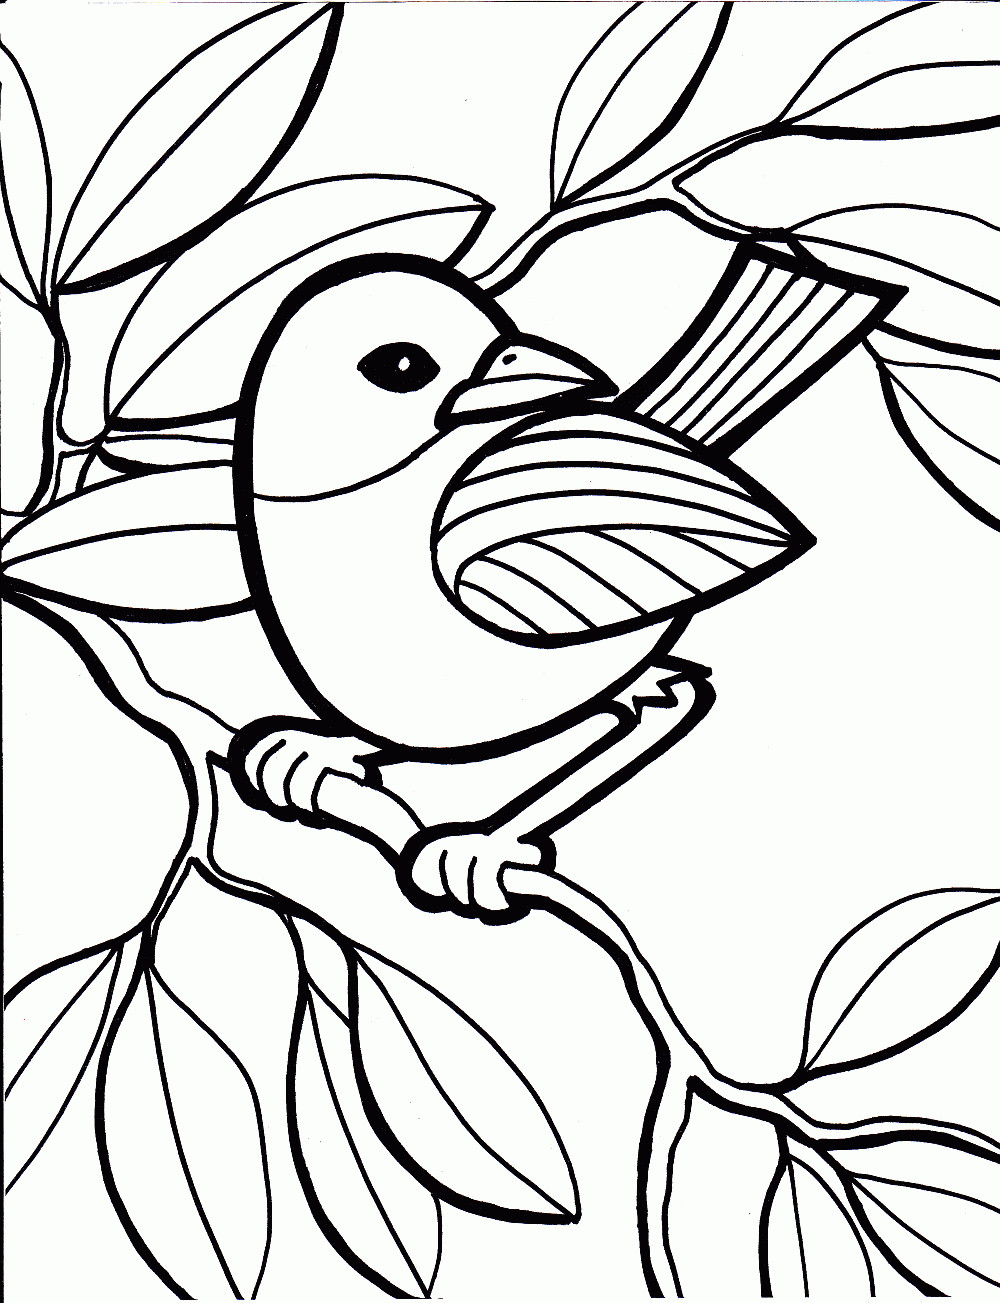 Coloring Pages Kidsboys.Com
 Coloring Pages Printables